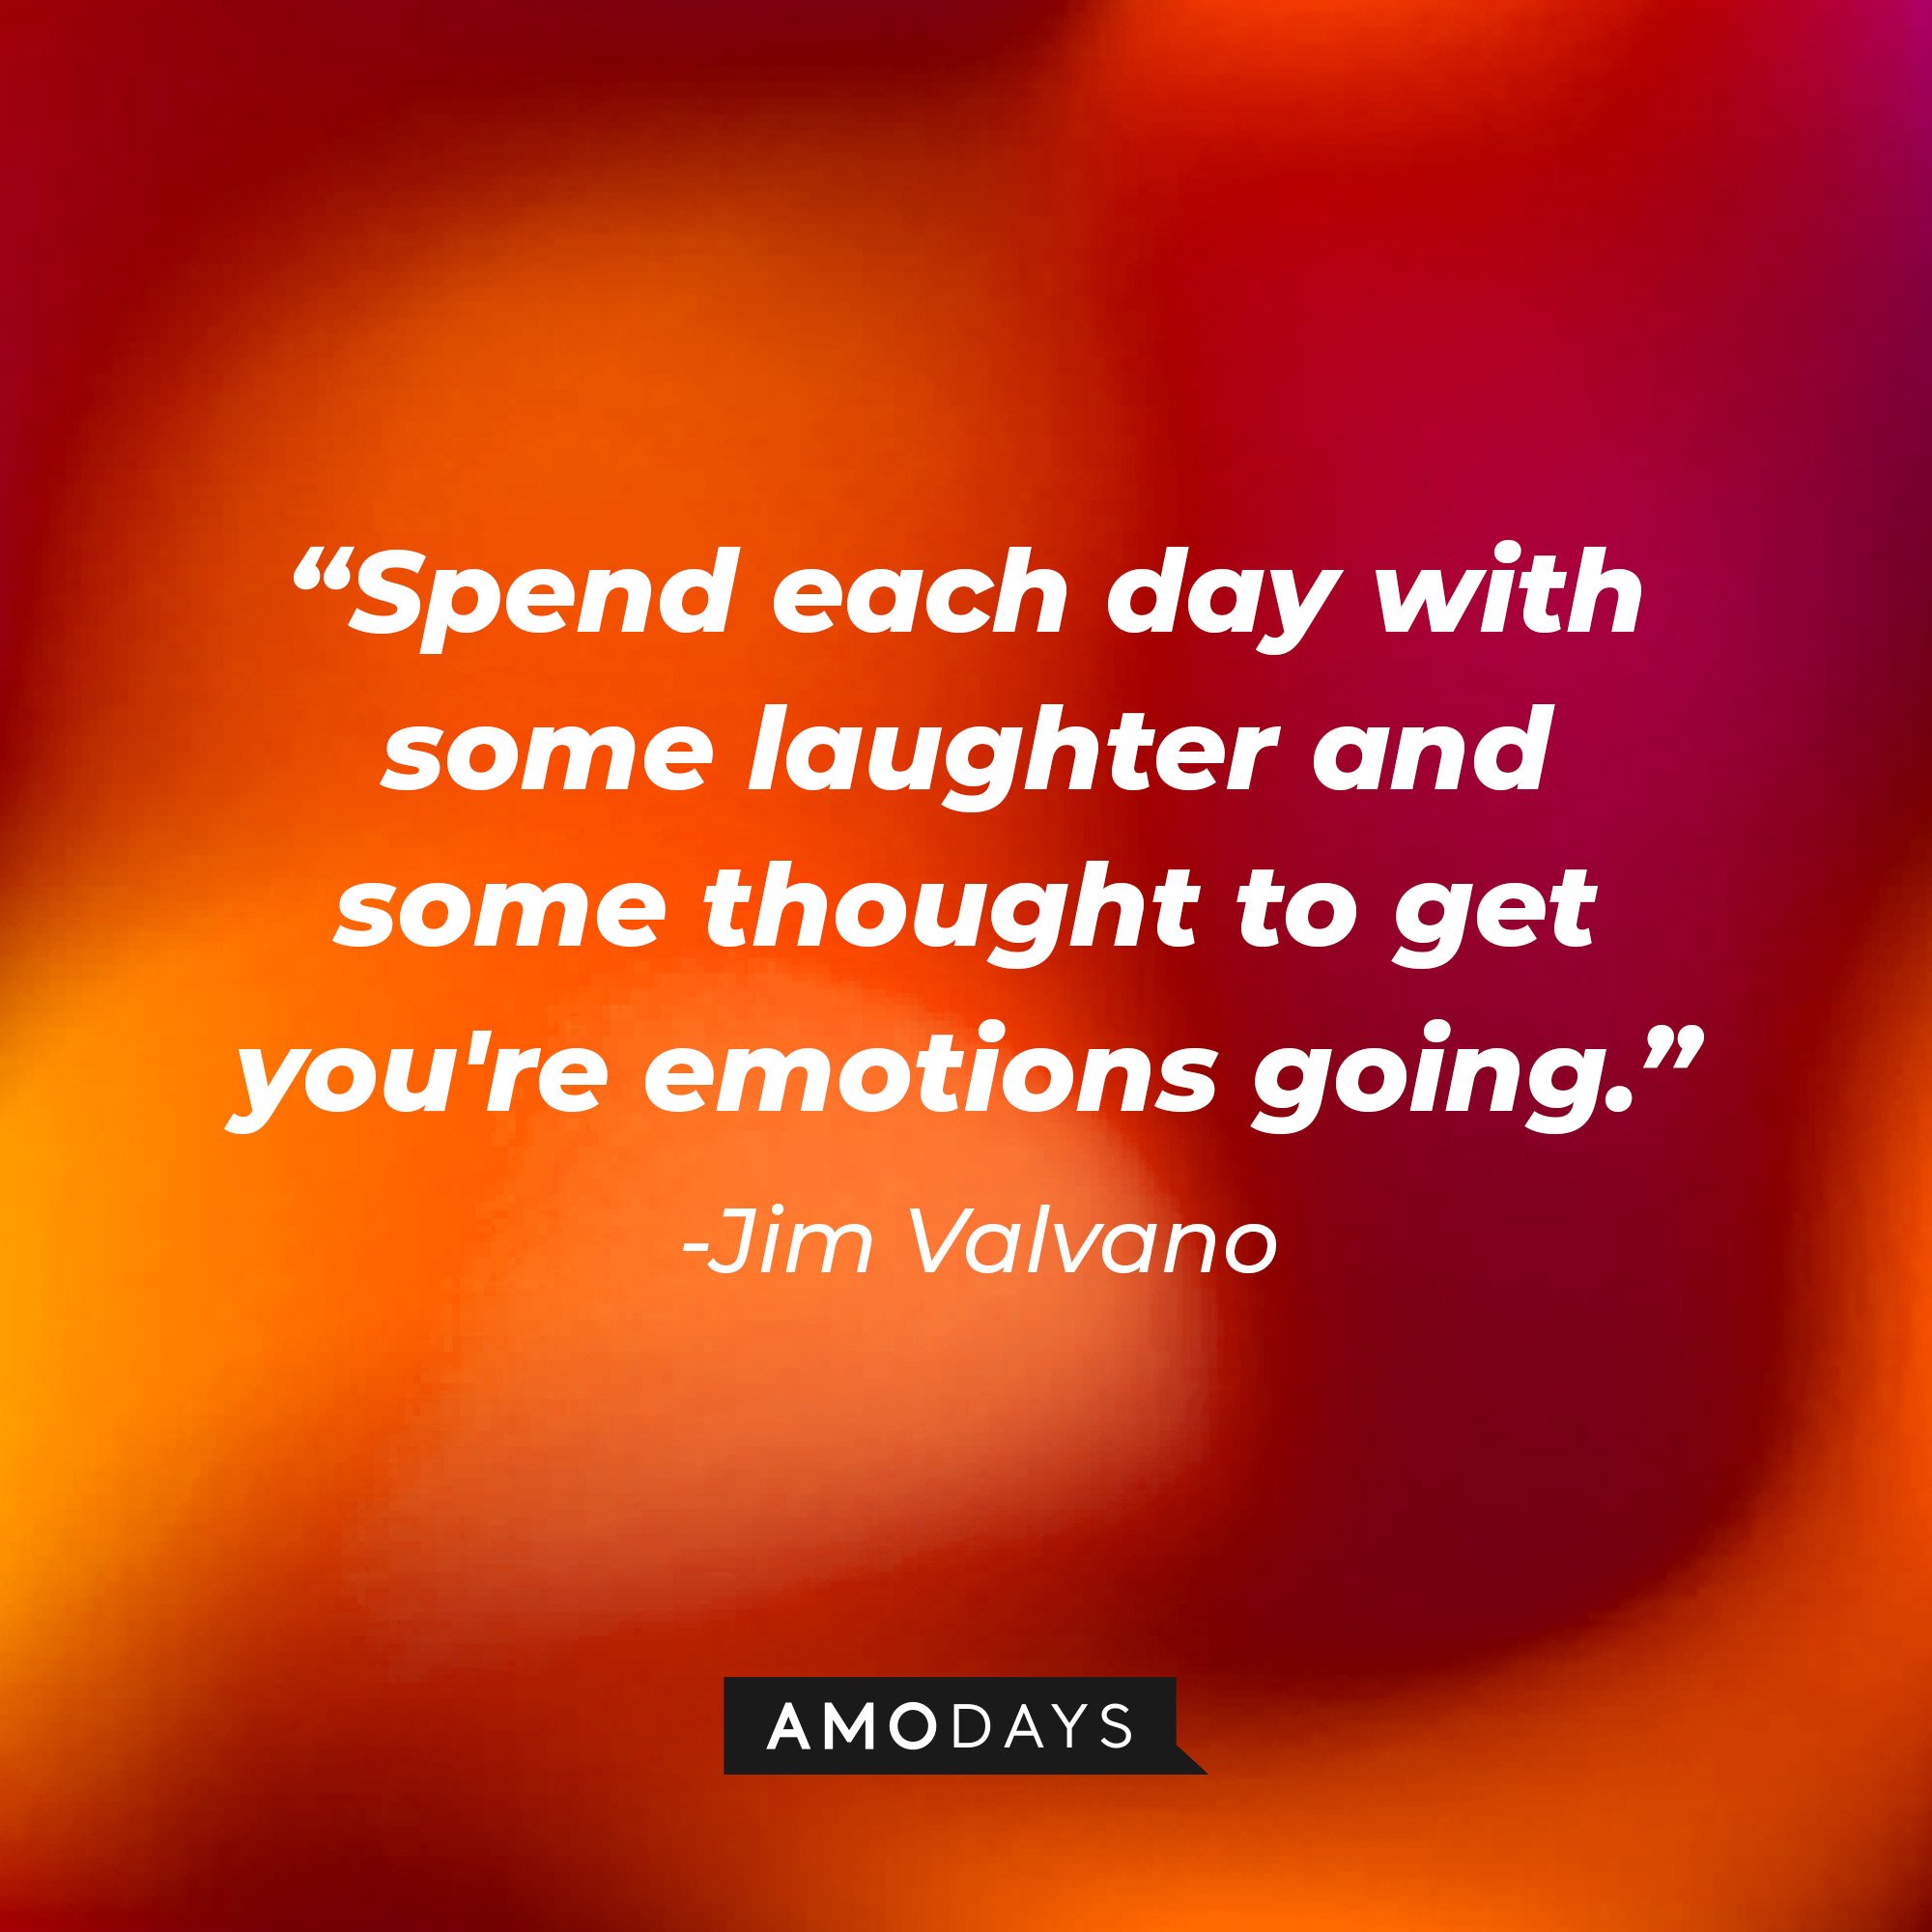 Jim Valvano’s quote: "Spend each day with some laughter and some thought to get you're emotions going." | Image: AmoDays